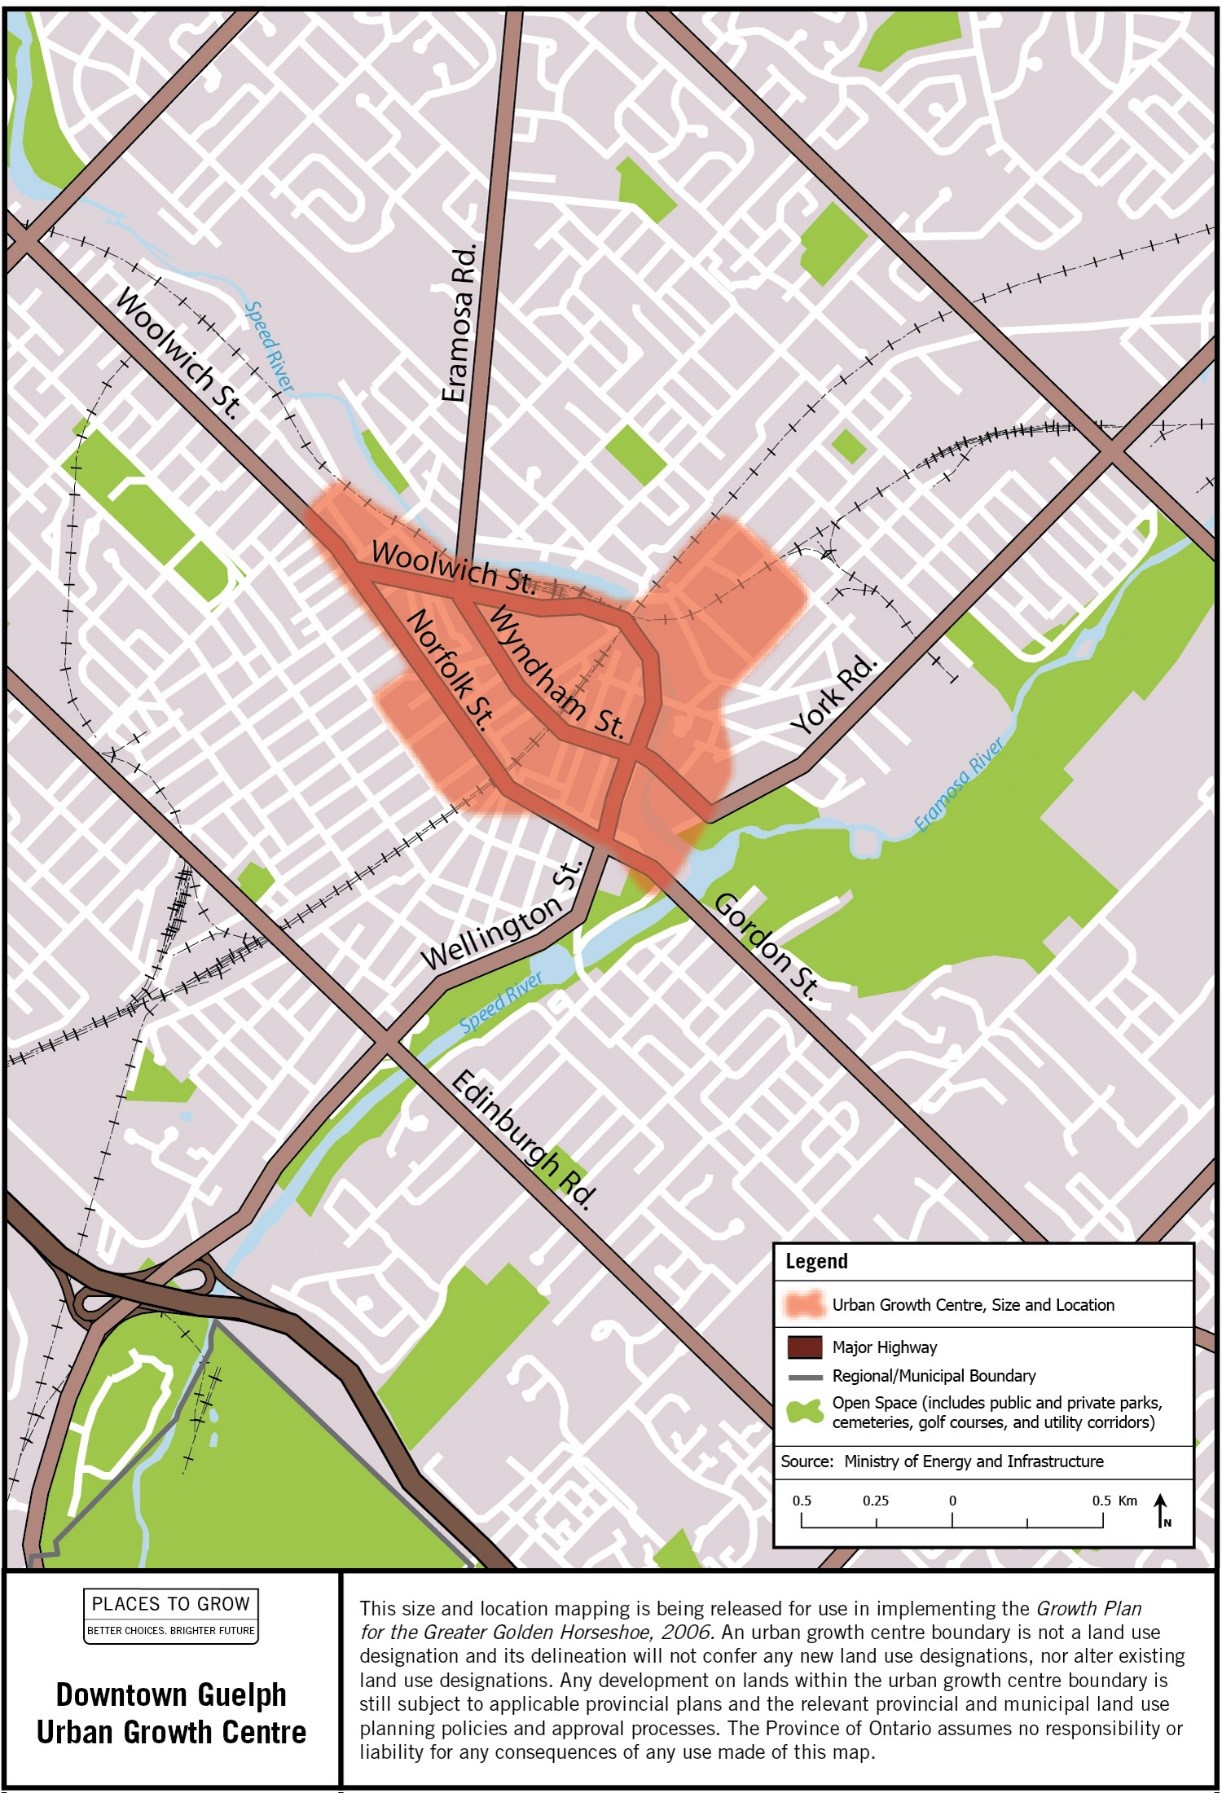 Map of the approximate size and location of the Downtown Guelph Urban Growth Centre in the vicinity of Wyndham and Woolwich Streets.